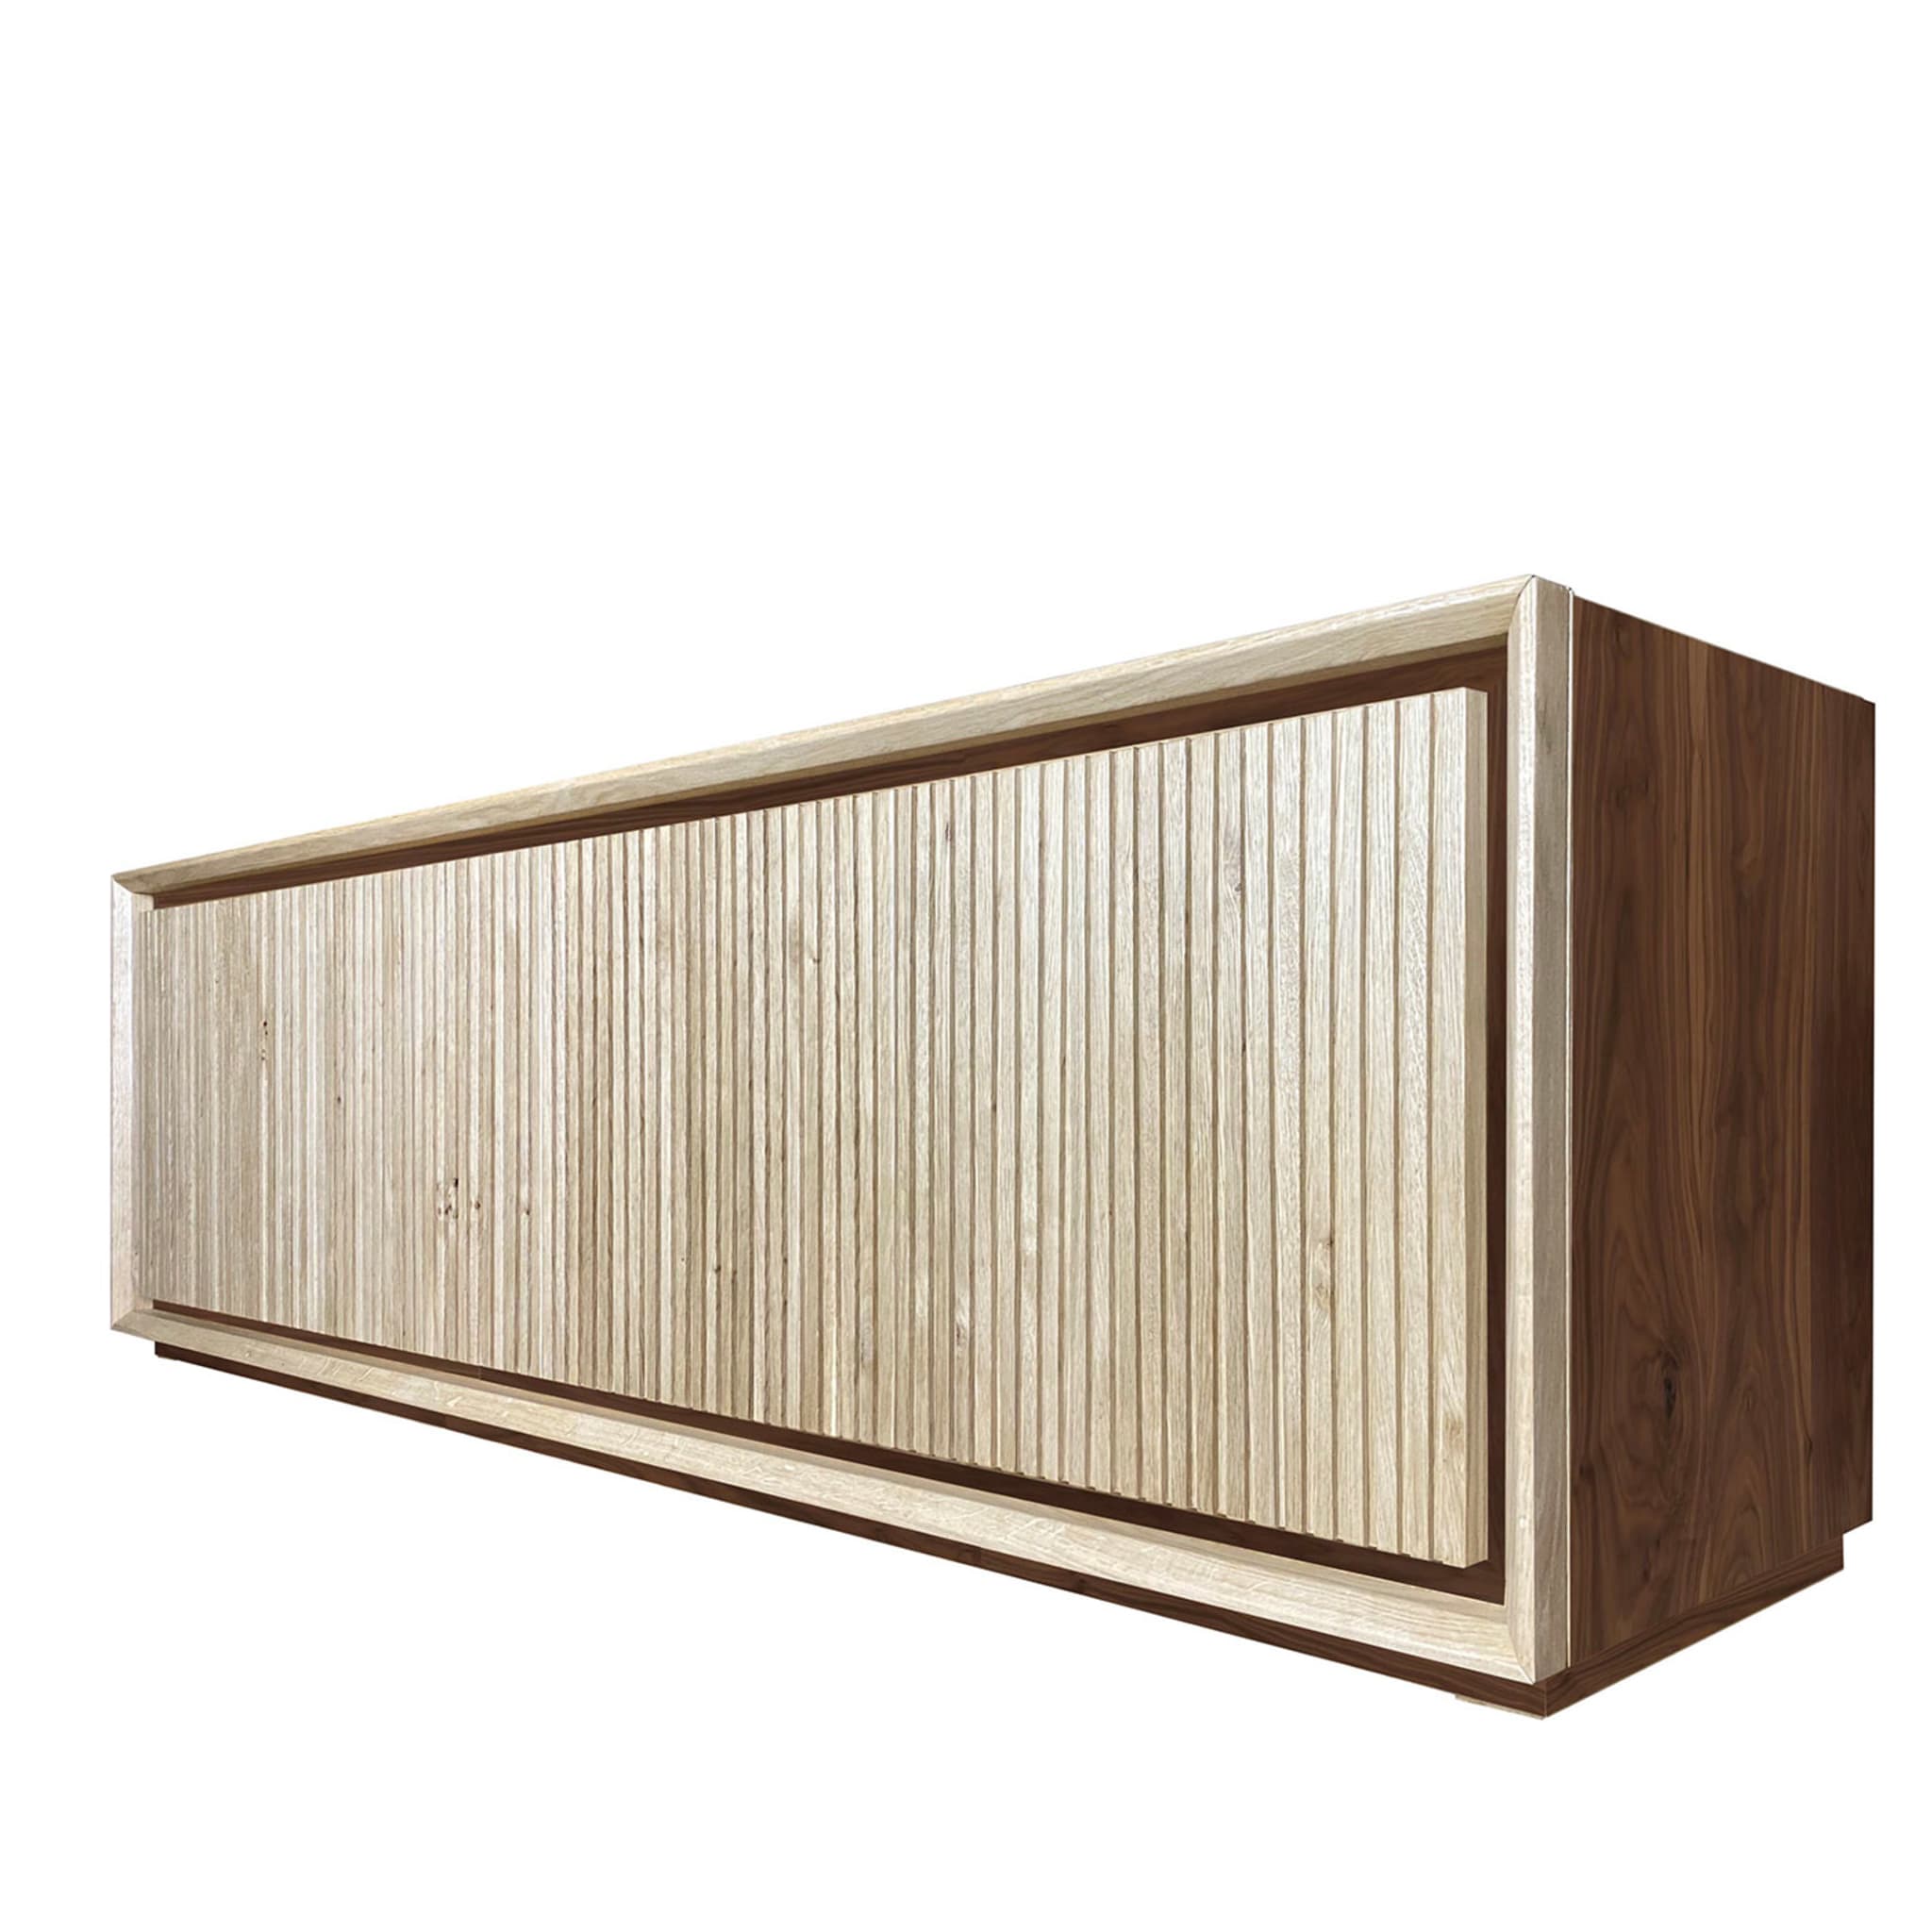 Fuga Noce Uno 4-Door Grooved Sideboard by Mascia Meccani - Alternative view 2